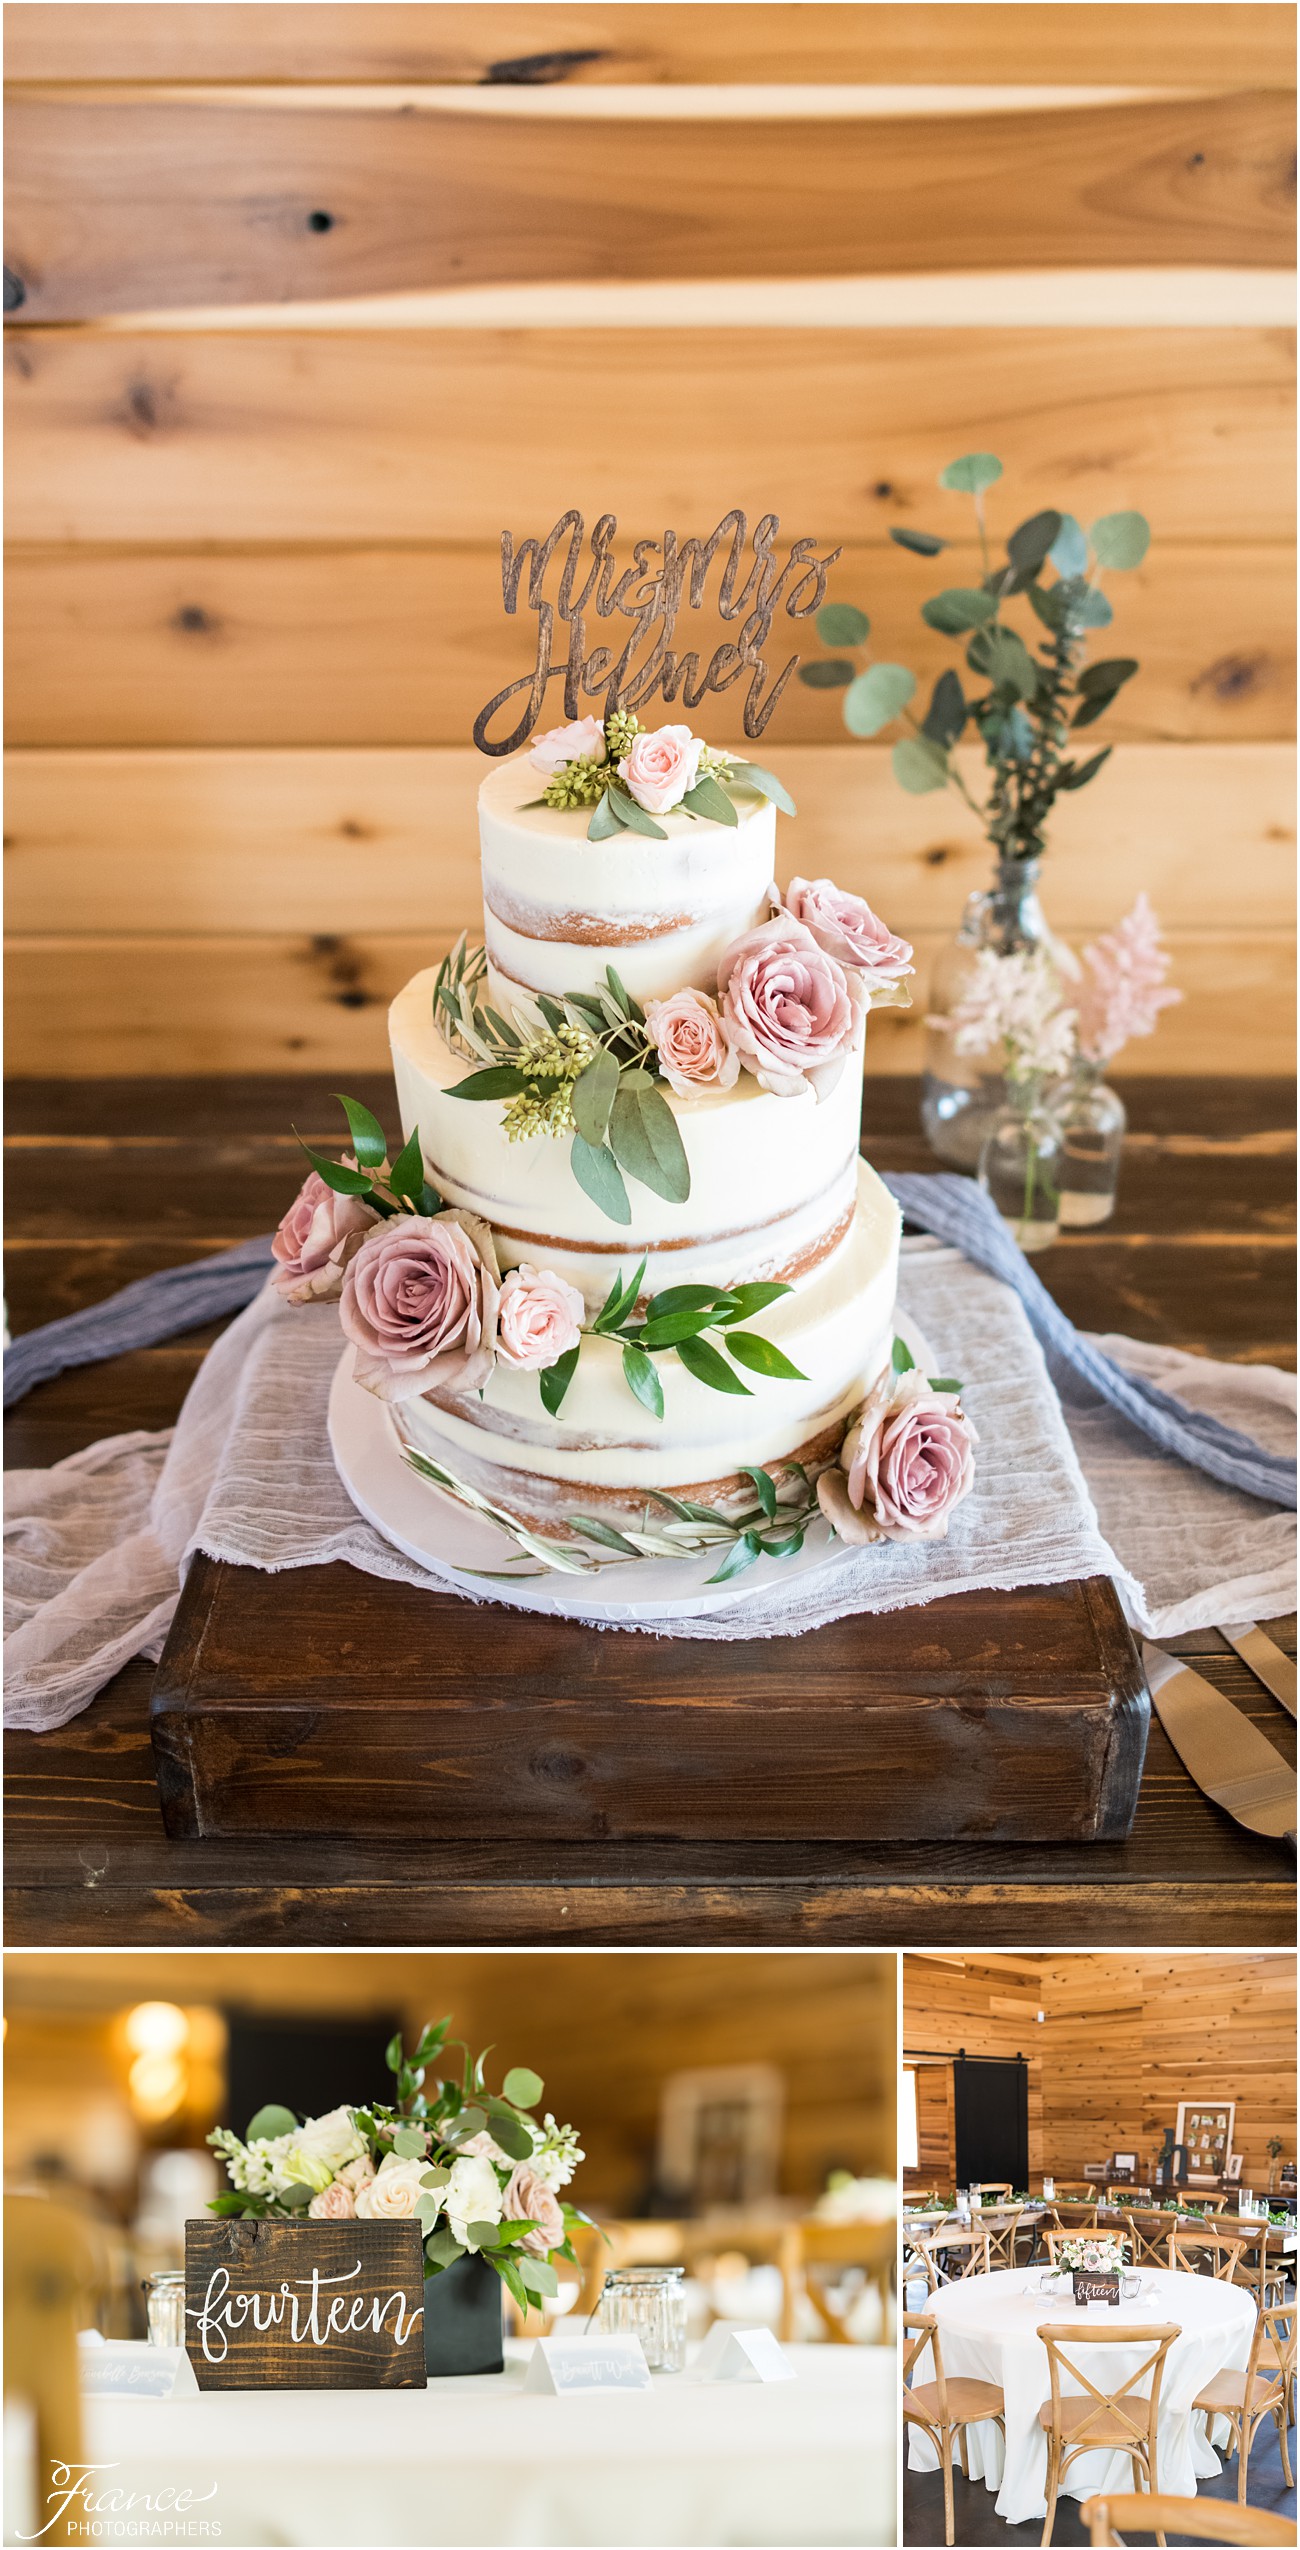 Rustic wedding cake with florals